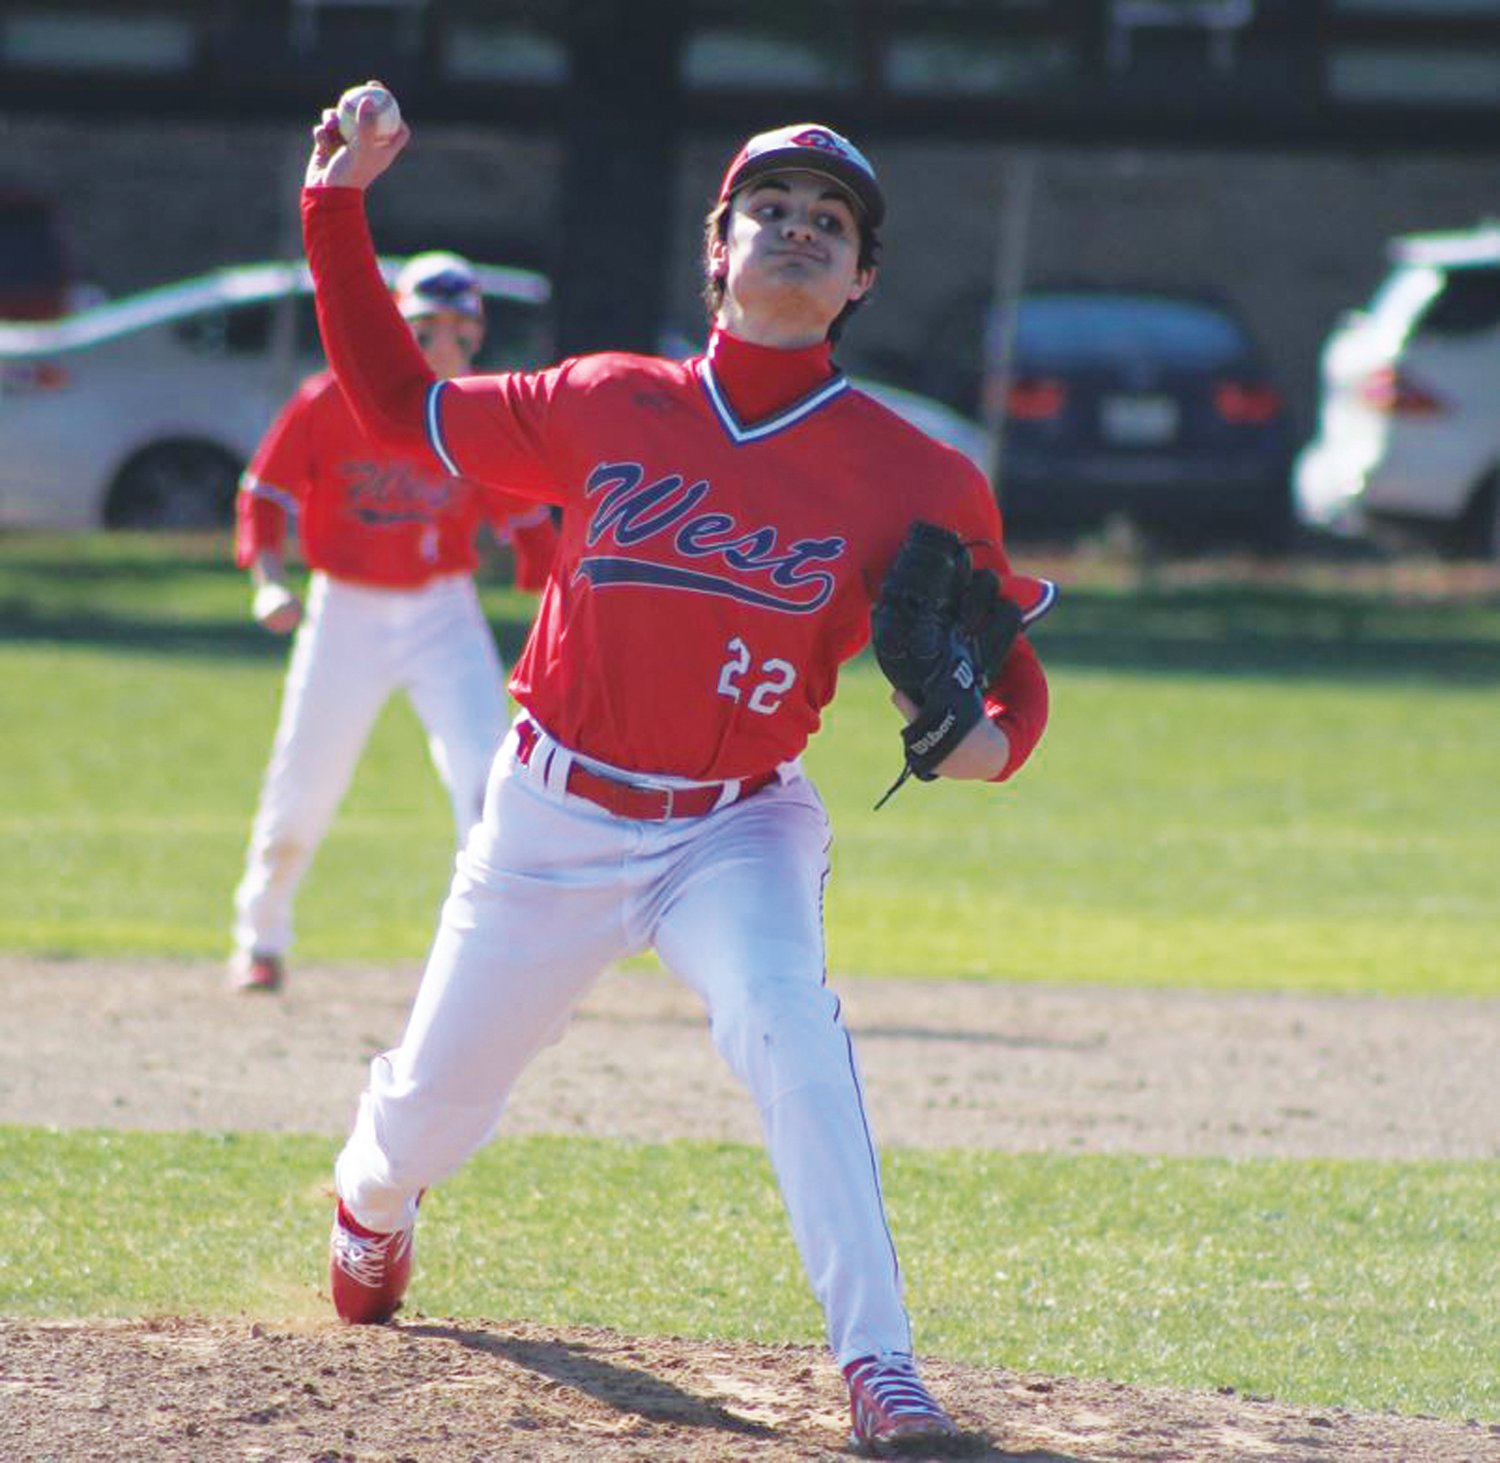 ACE: Cranston West starting pitcher Luciano Leone delivers a pitch on Monday afternoon against Pilgrim High School during the team’s season opener. The Falcons lost 2-0. but Leone had a solid outing by allowing just three hits and two runs across five innings of work while striking out five Pilgrim batters. The Falcons will get a chance for some revenge when they host Pilgrim on Thursday. (Photos